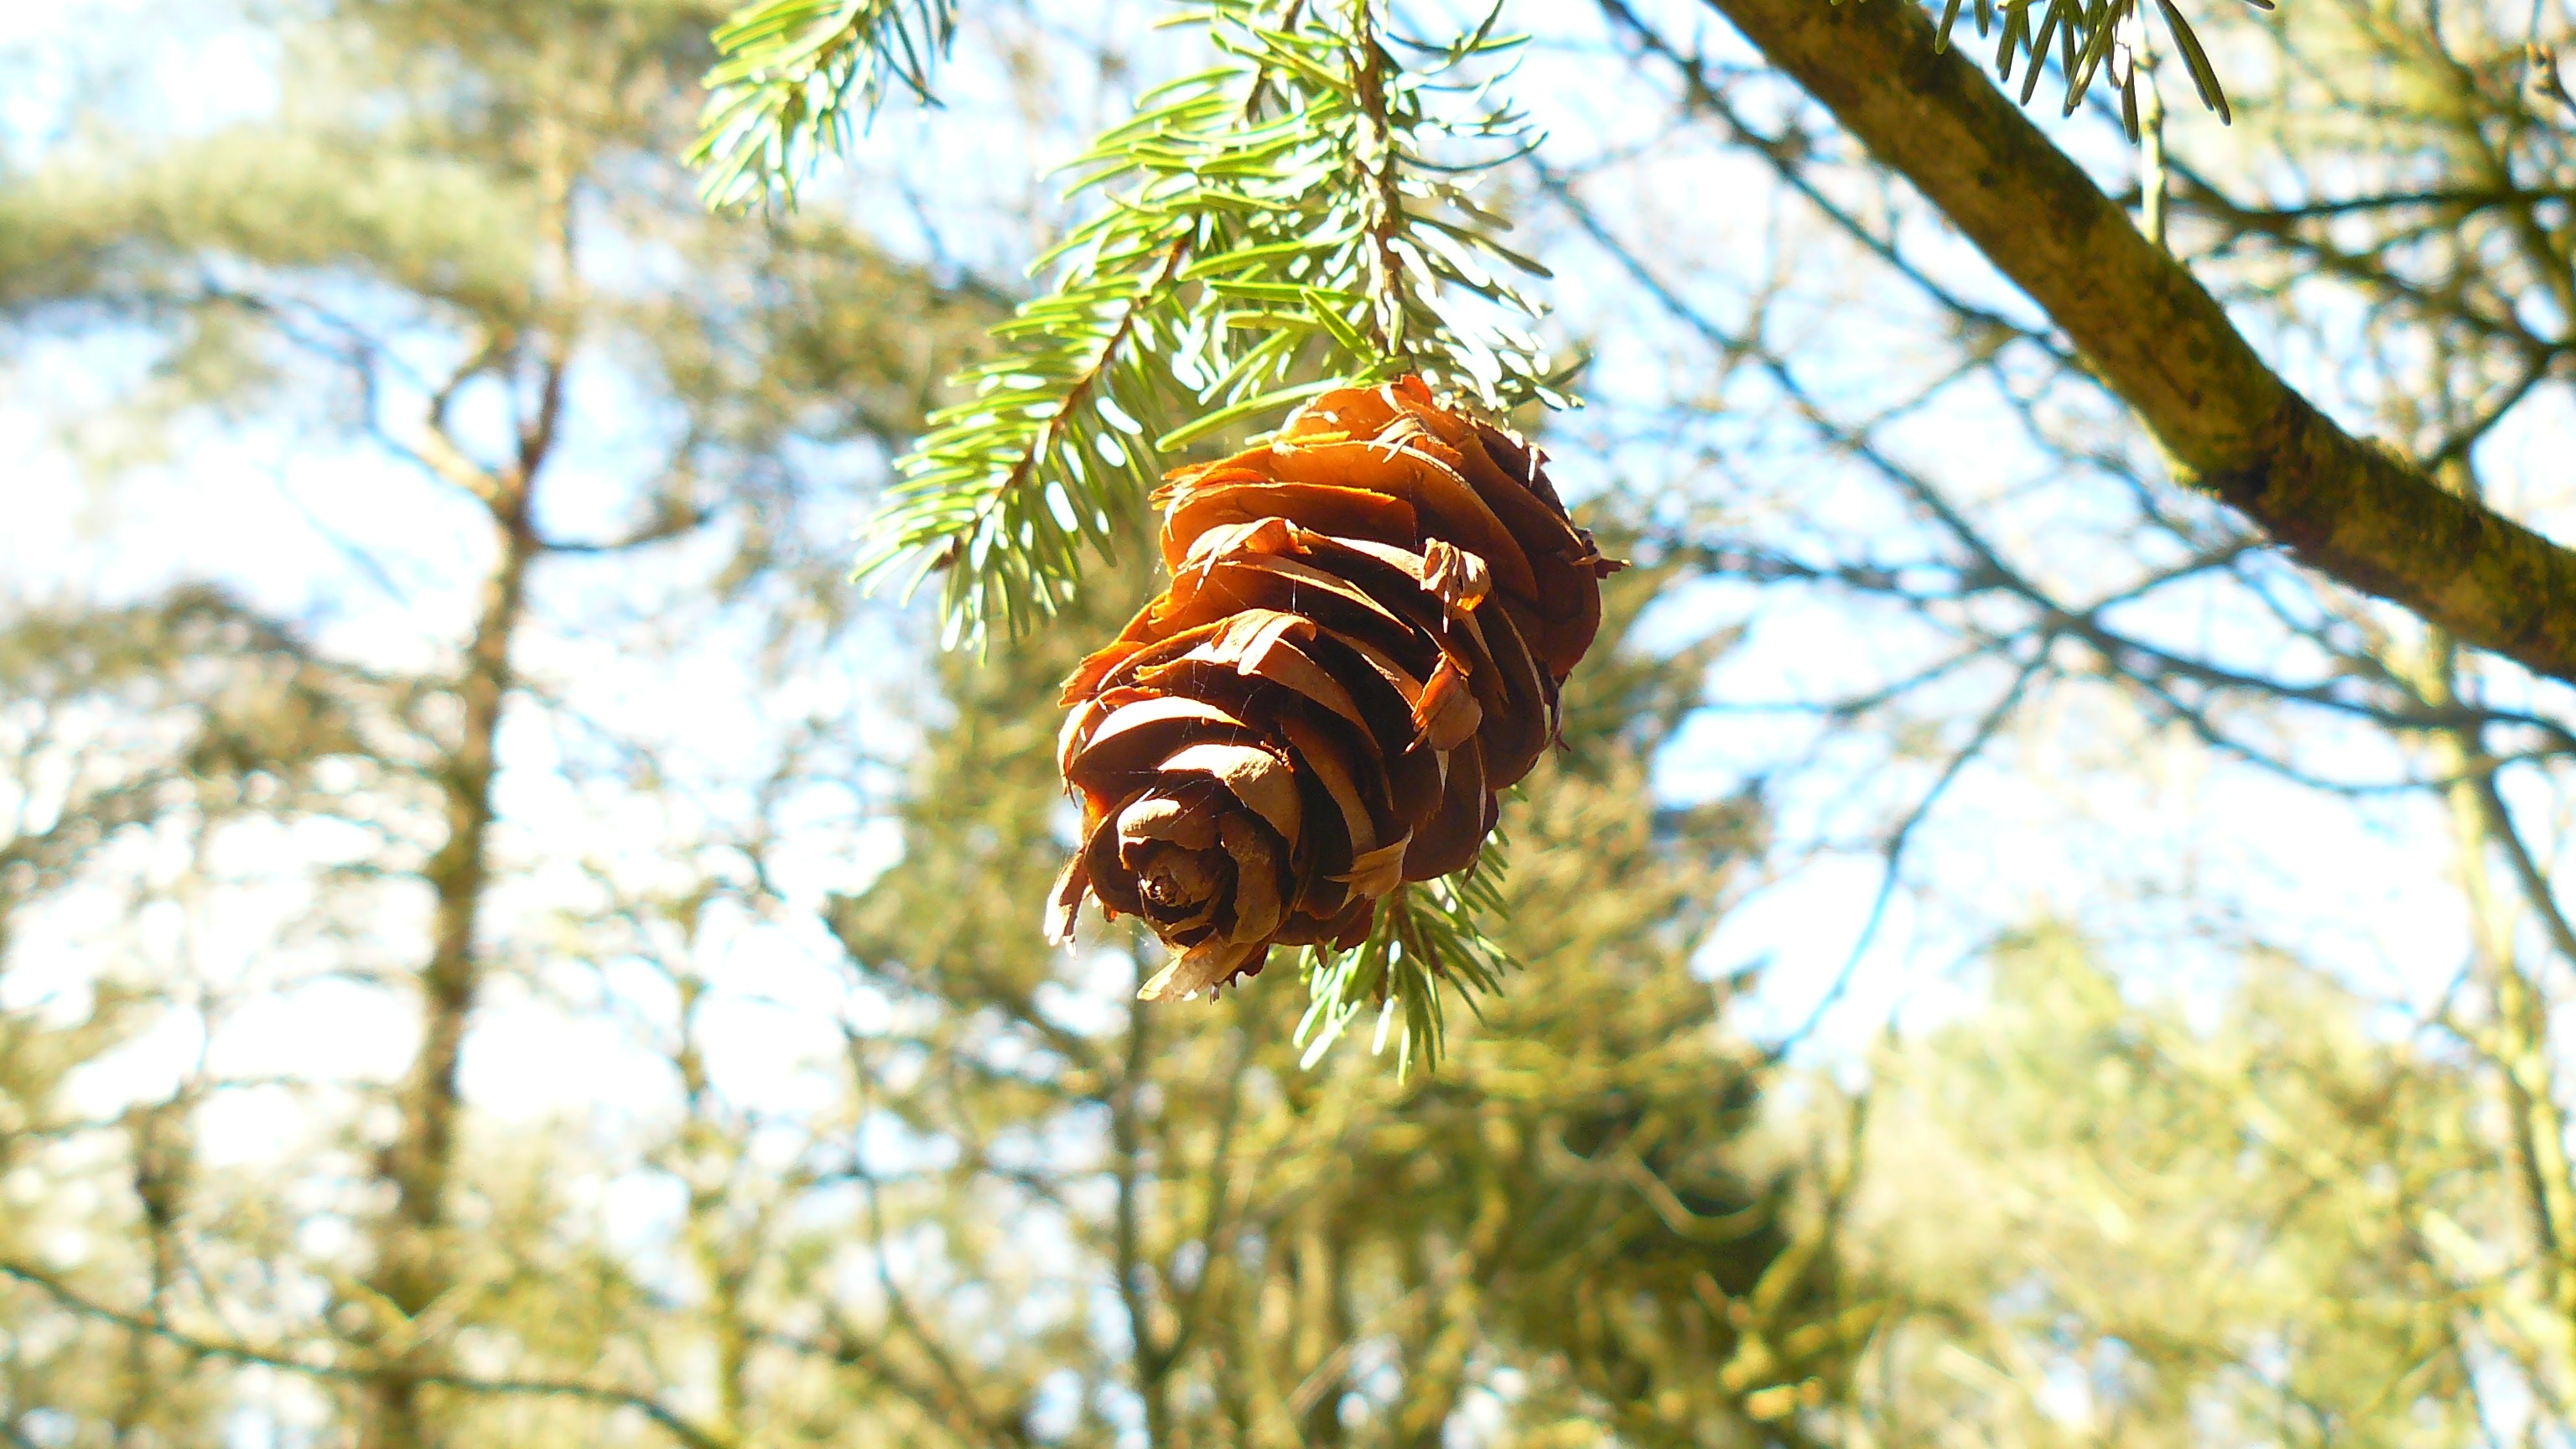 General 3072x1728 forest pine cones leaves nature